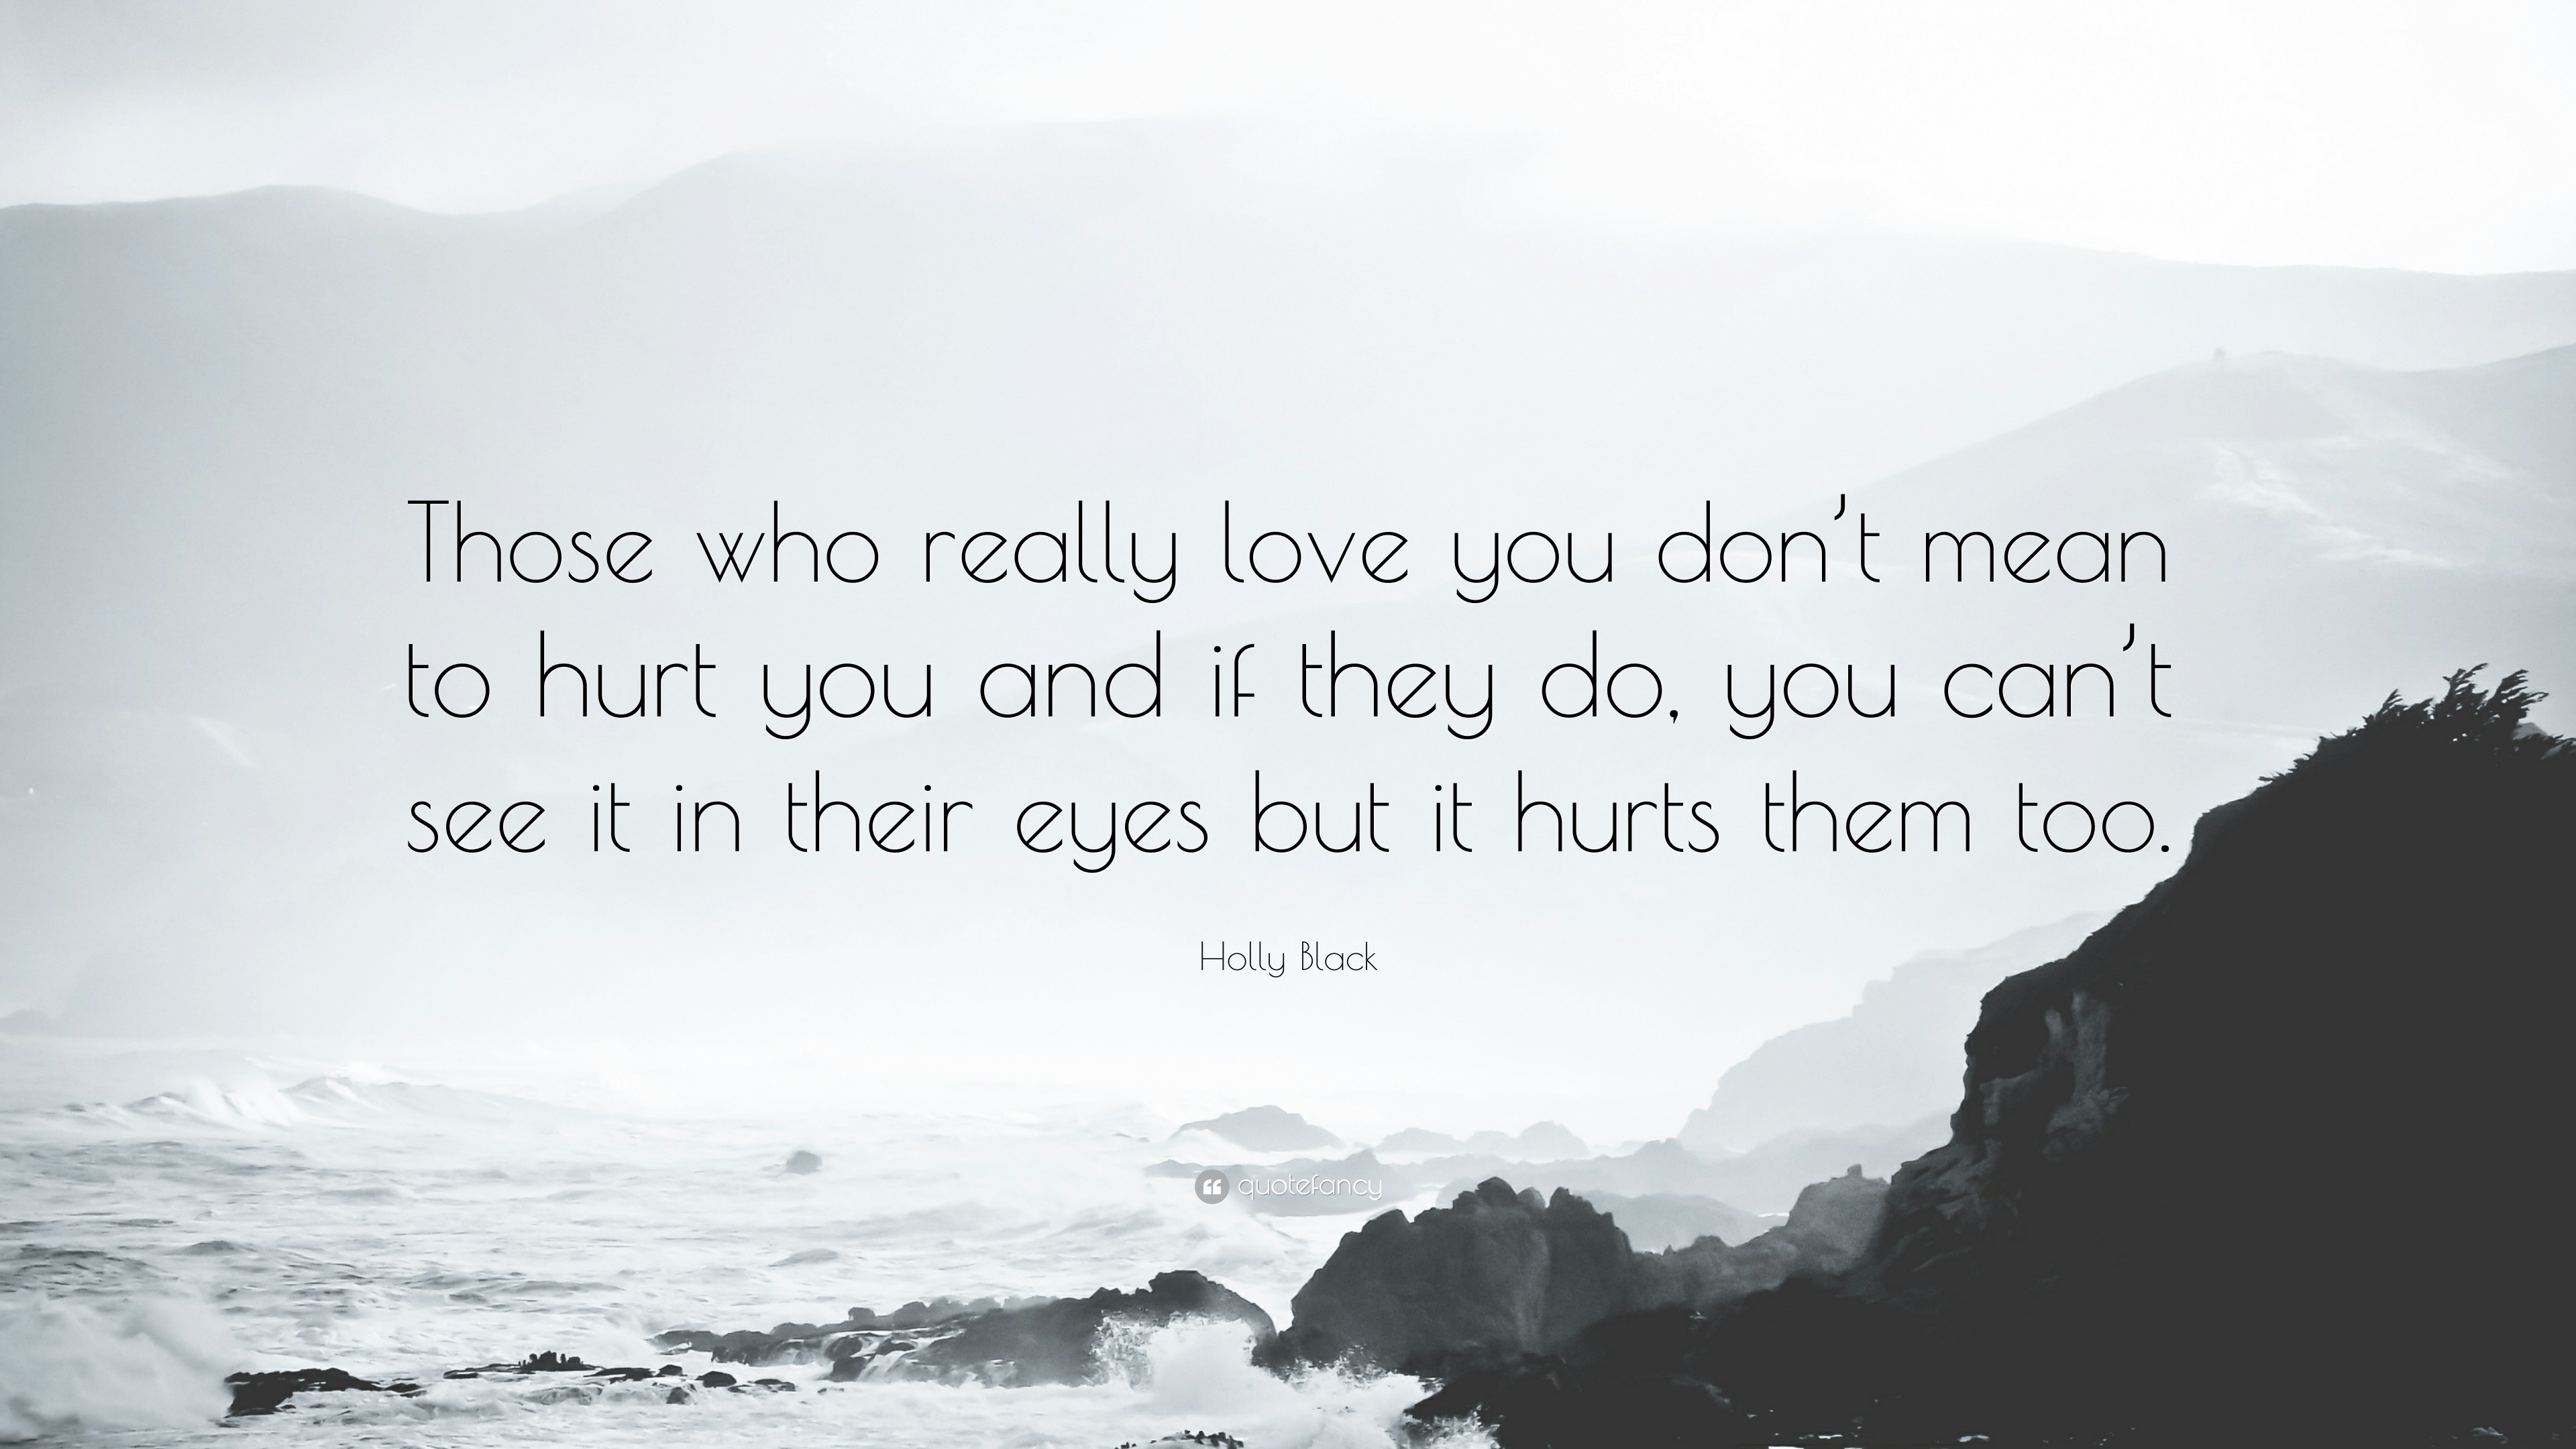 Holly Black Quote “Those who really love you don t mean to hurt